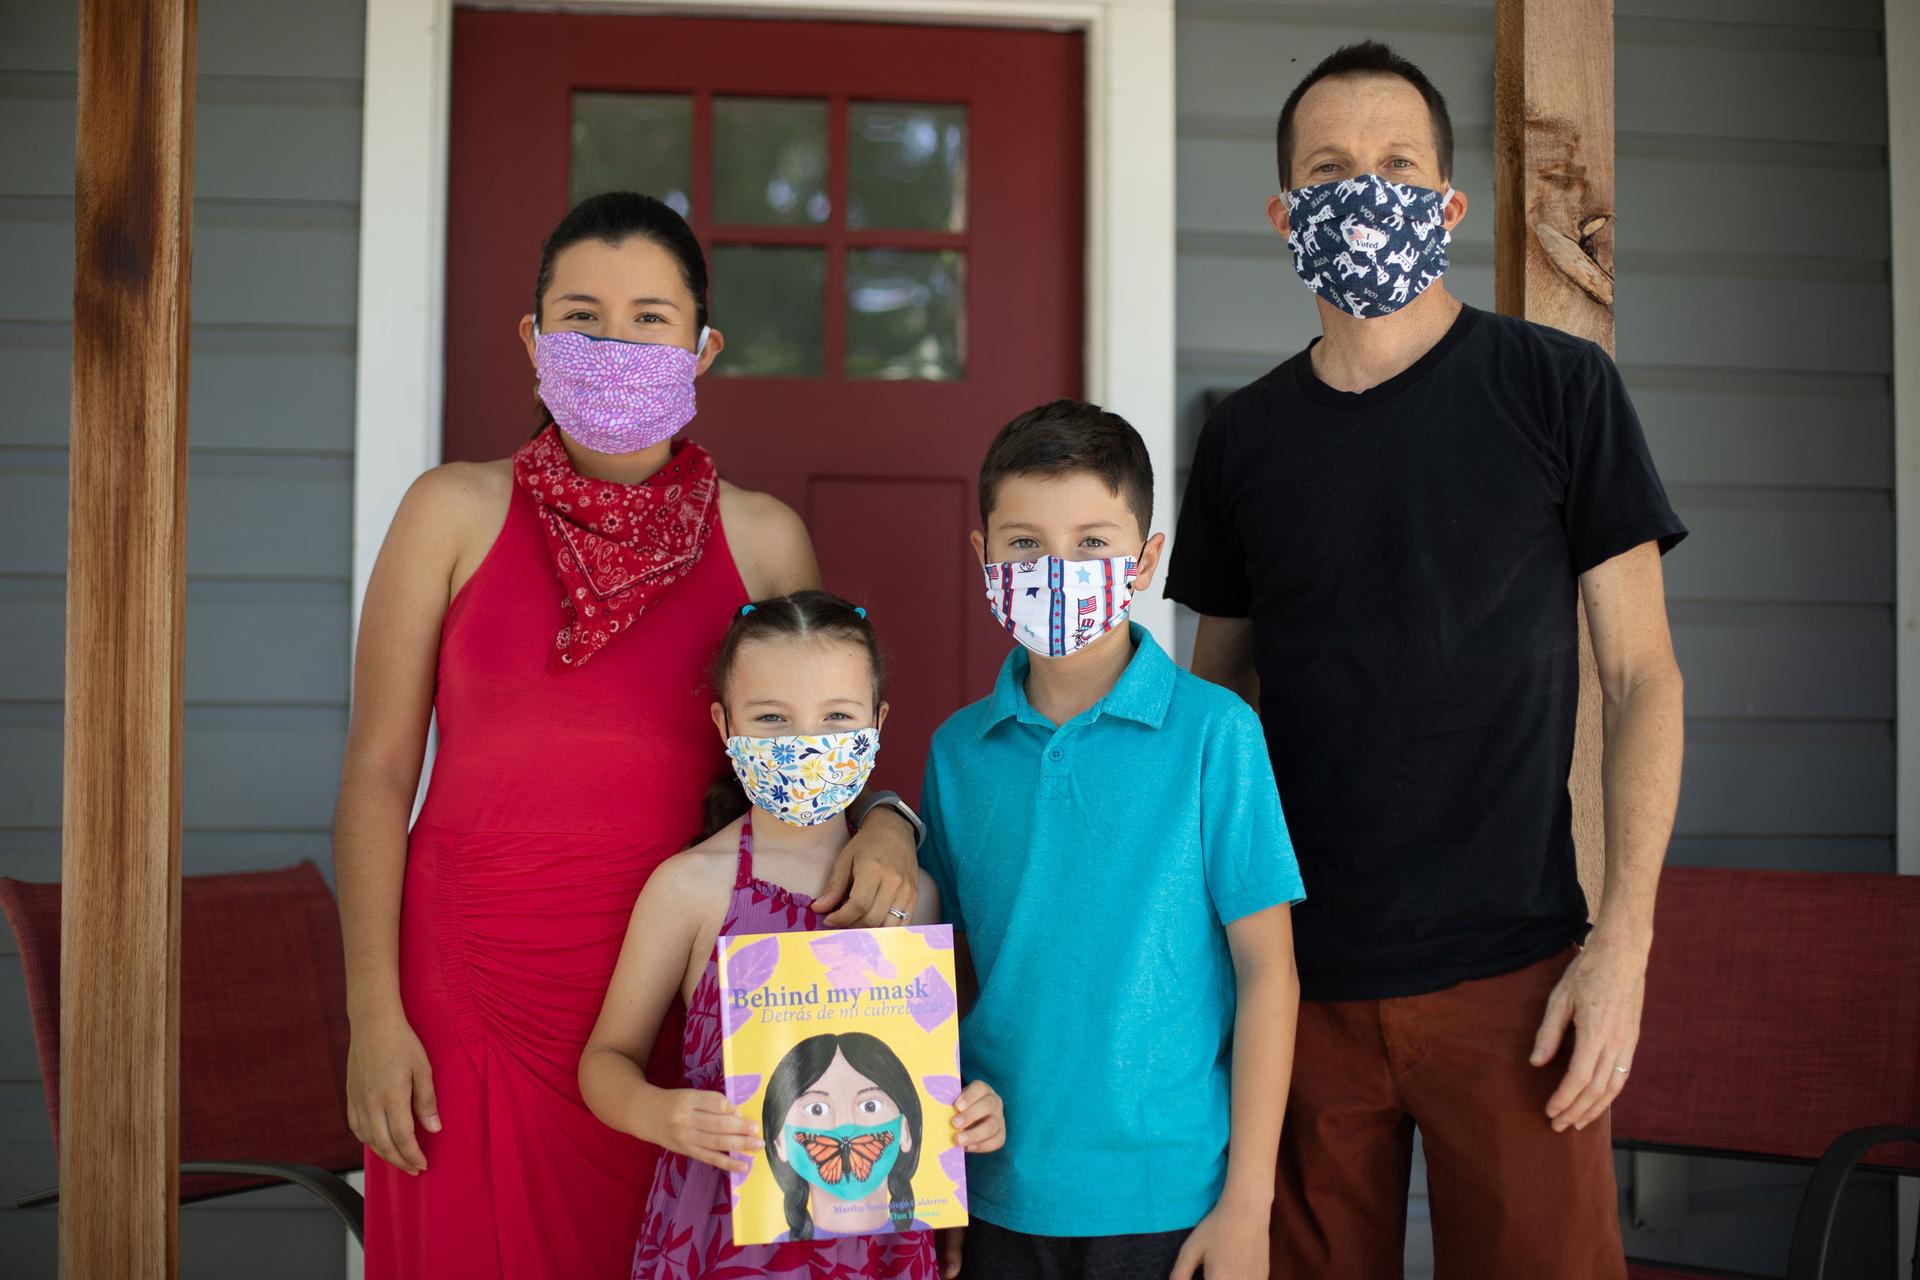 A family of four pose for a photo wearing masks. The young girl holds a book in her hands.